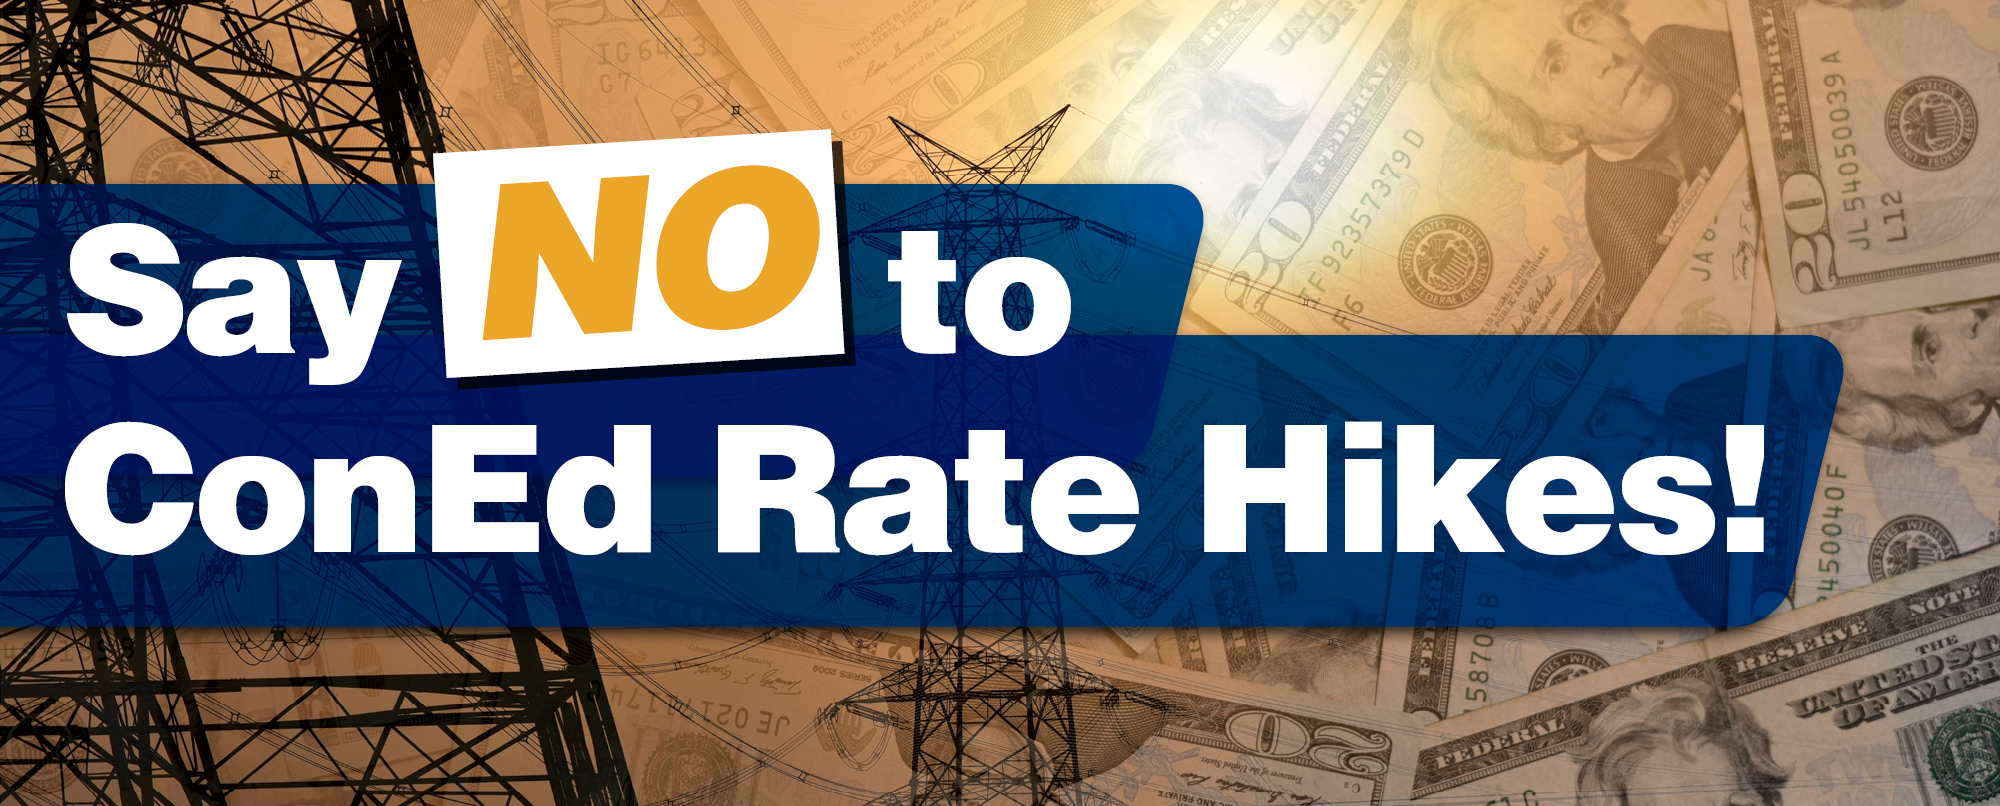 Tell the Public Service Commission: NO to Con Edison Rate Hikes!